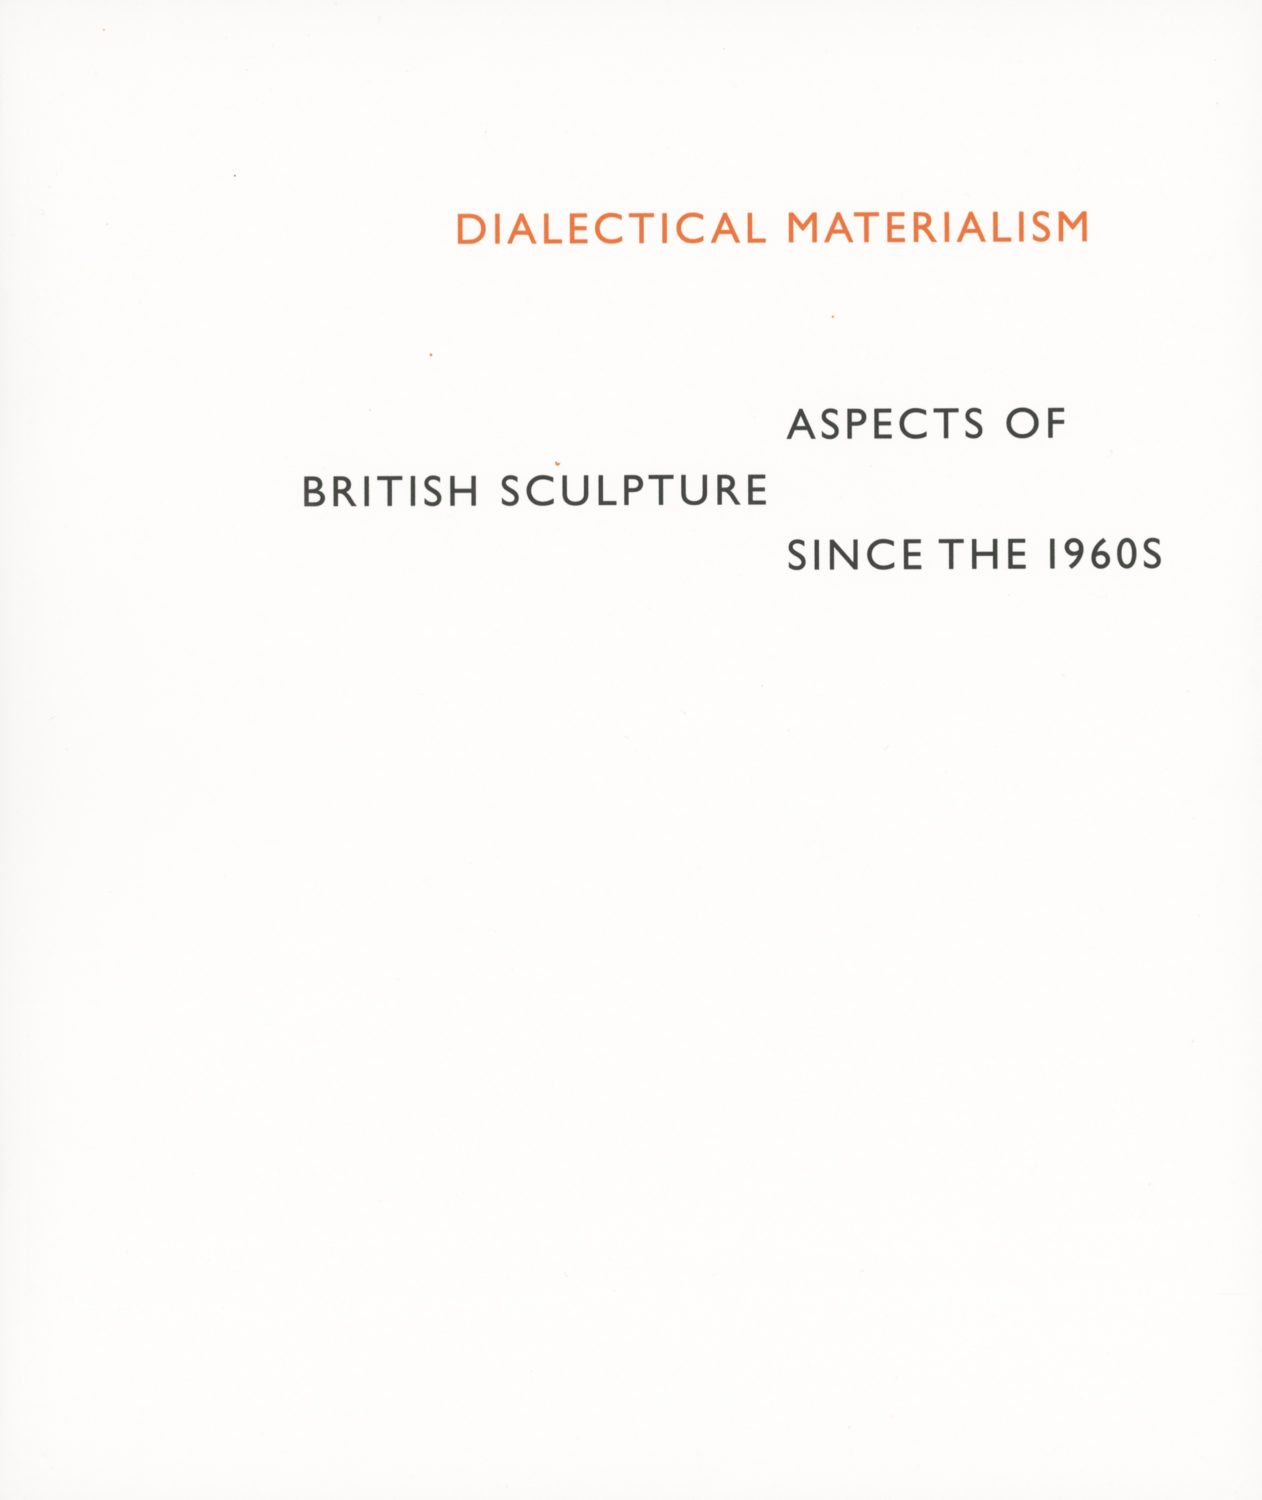 Dialectical Materialism, Aspects of British Sculpture Since the 1960s